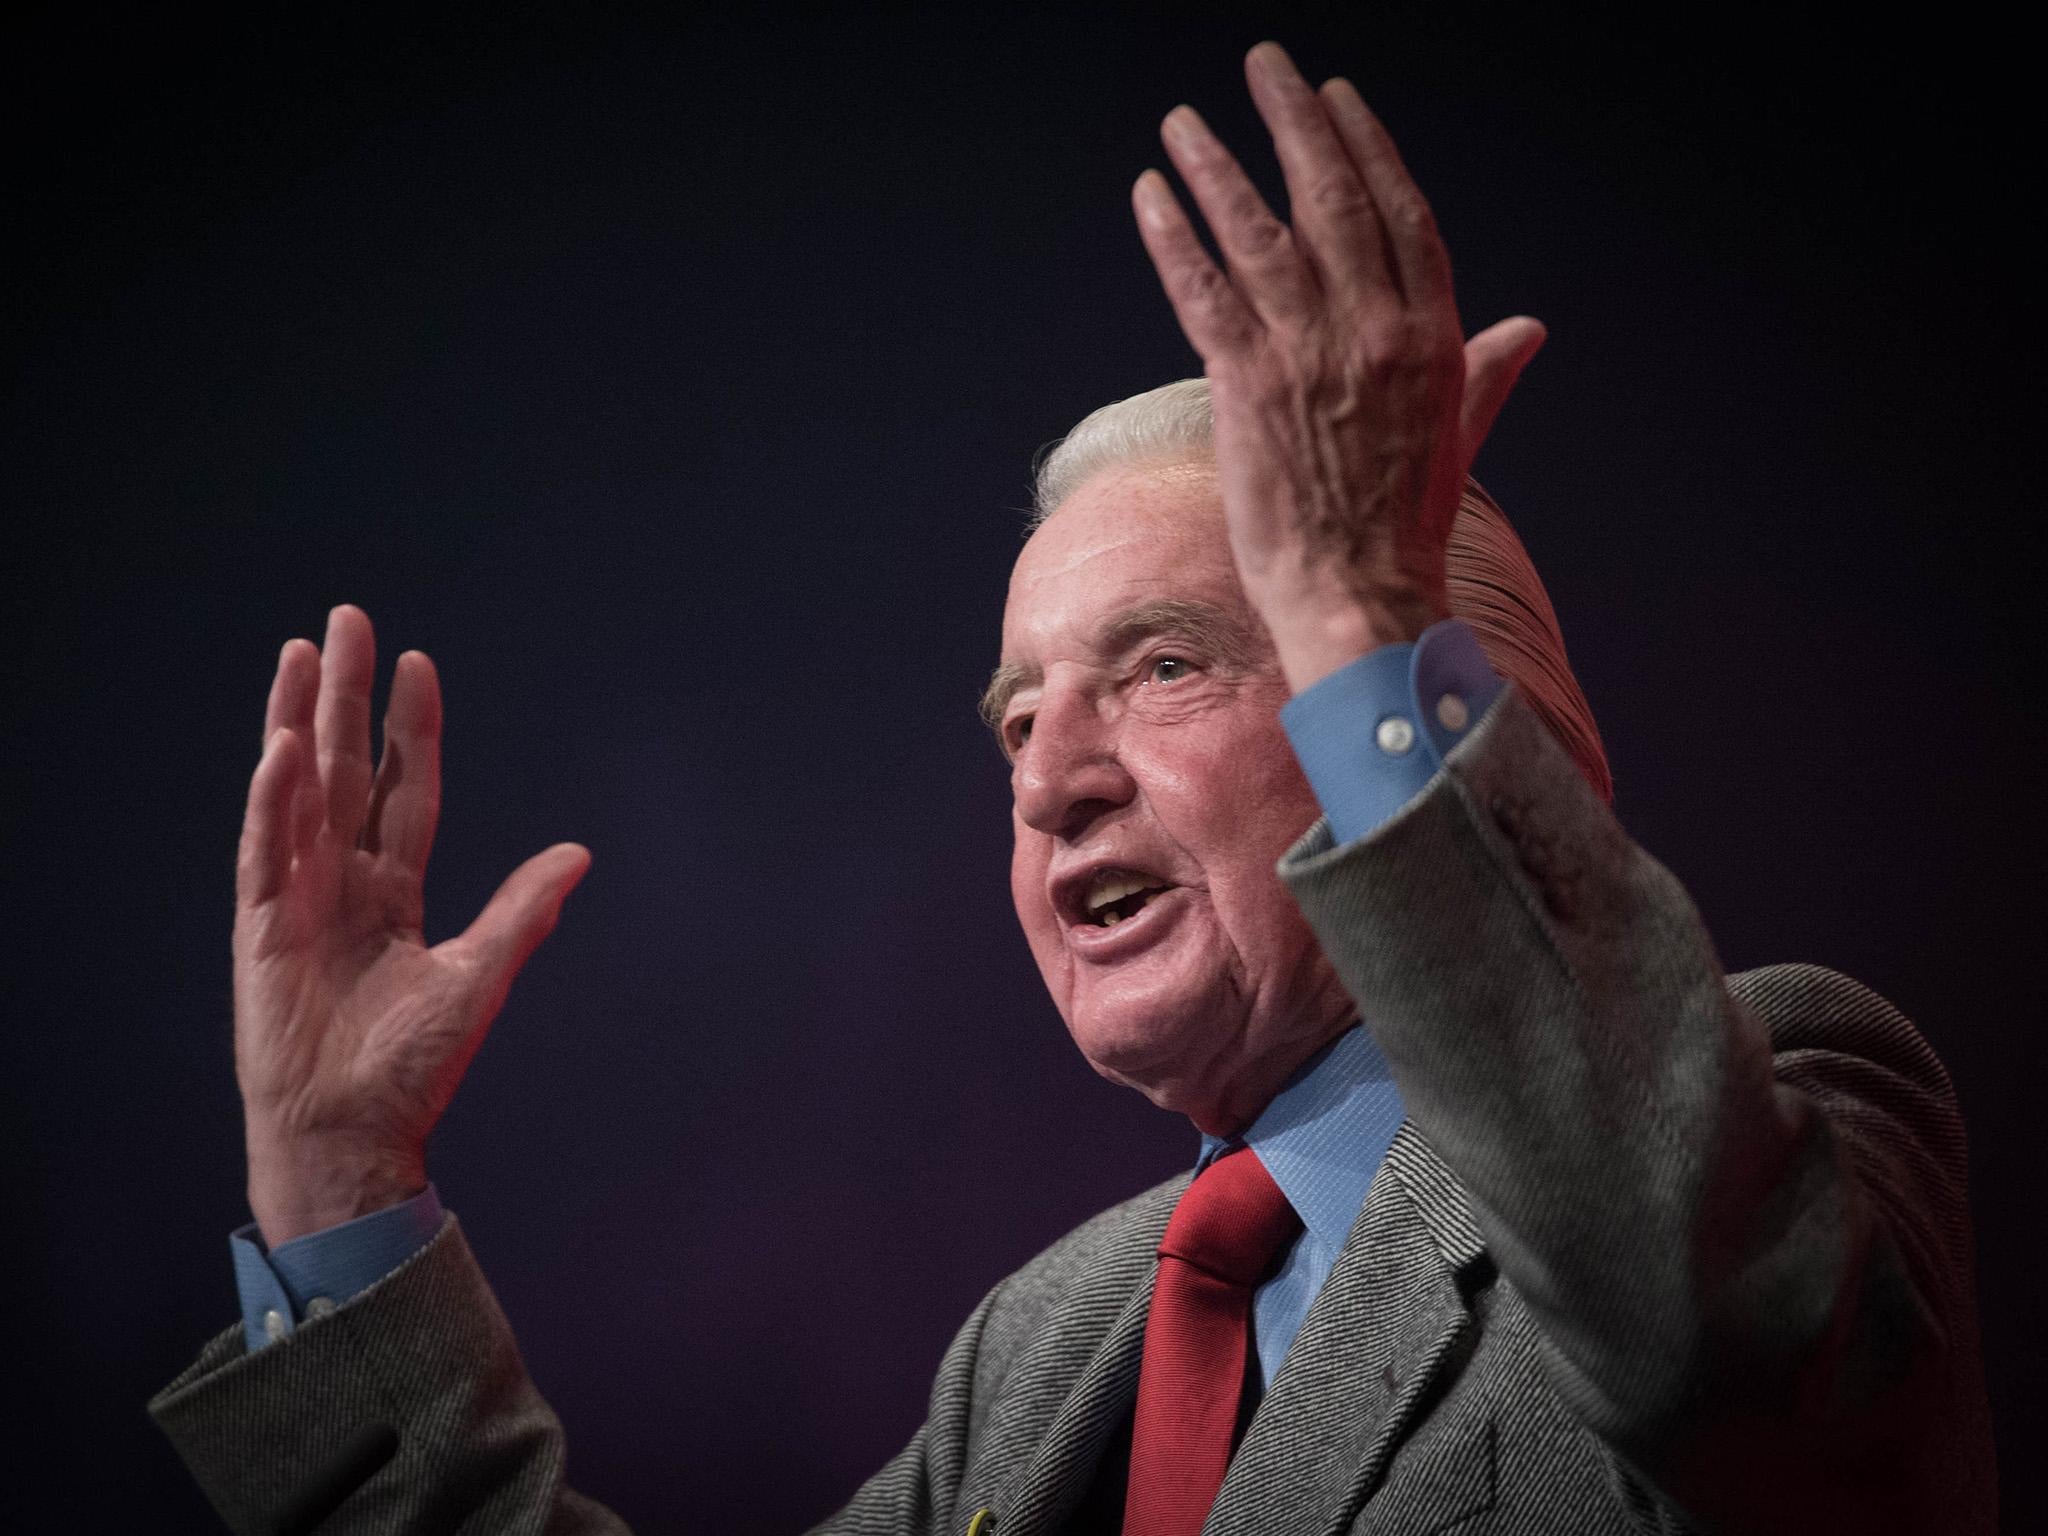 Dennis Skinner voted to leave the European Union